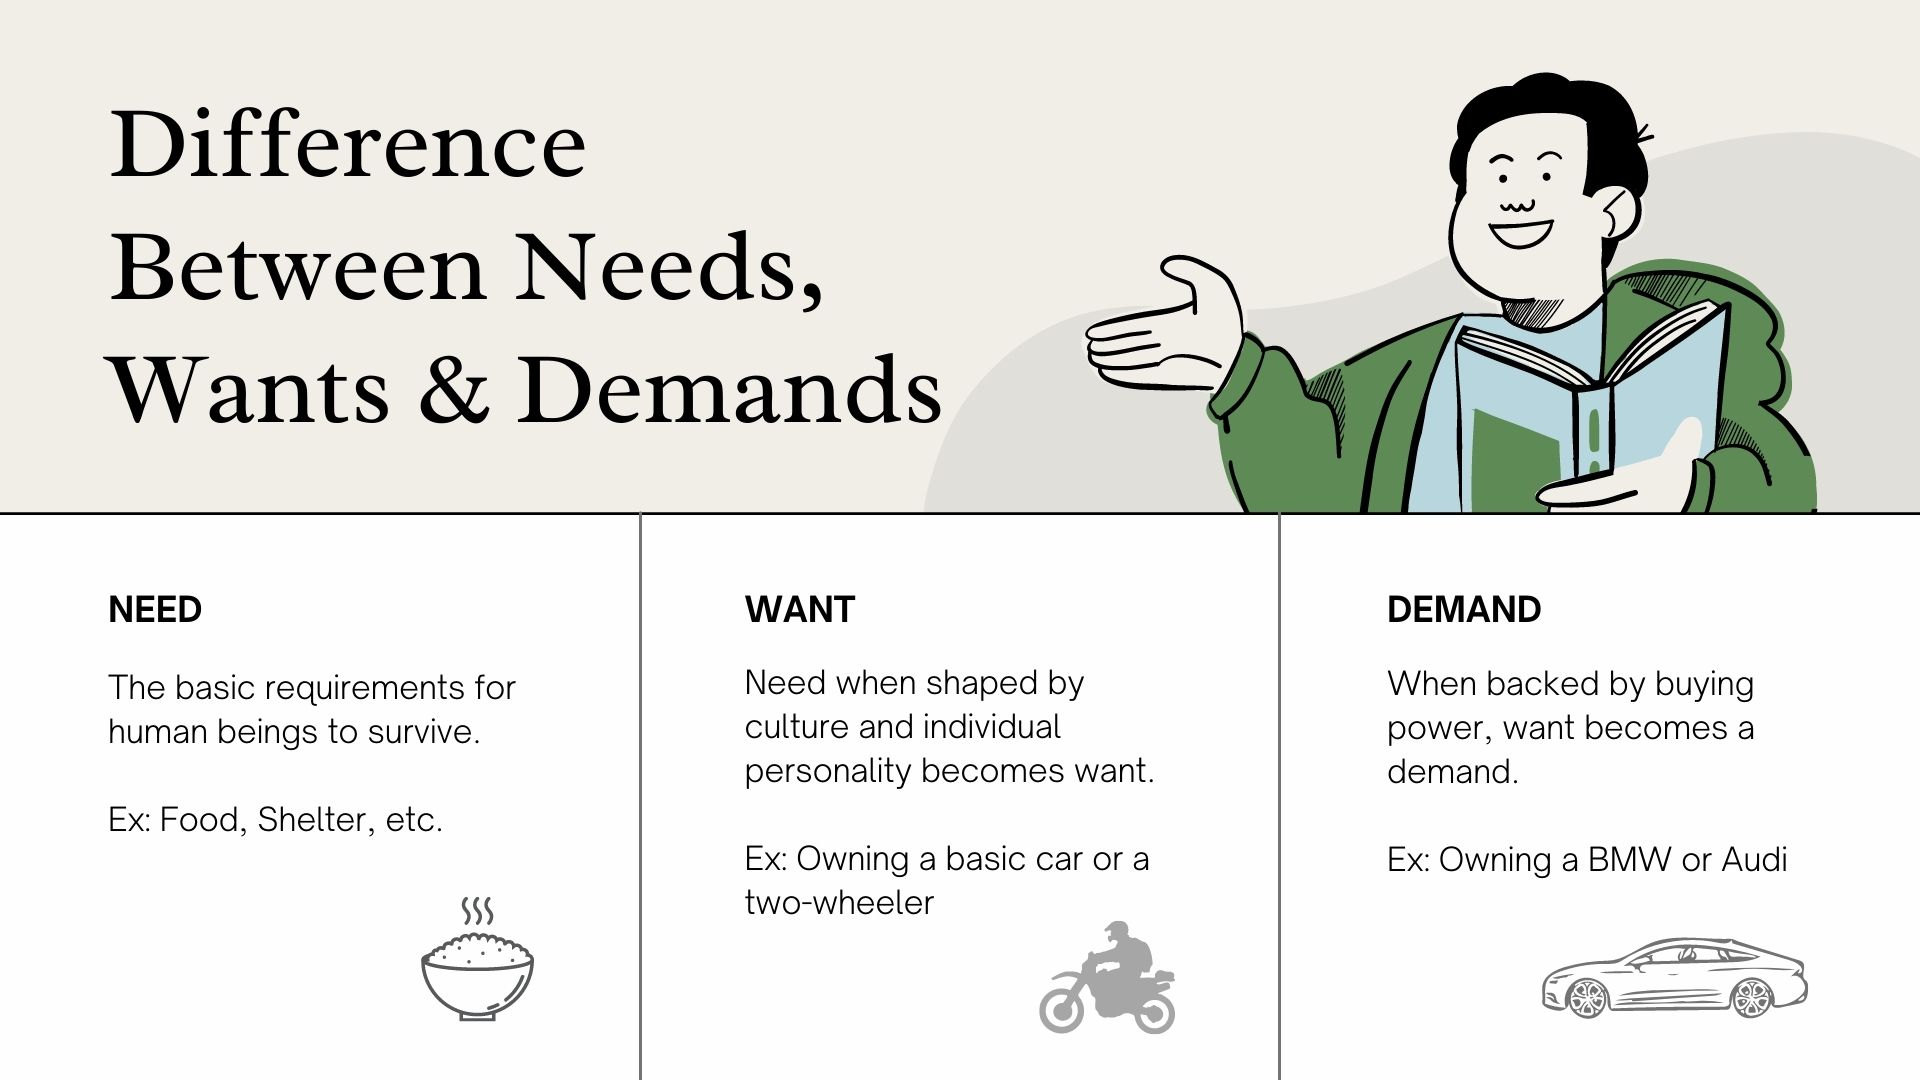 Difference between needs, wants, and demands